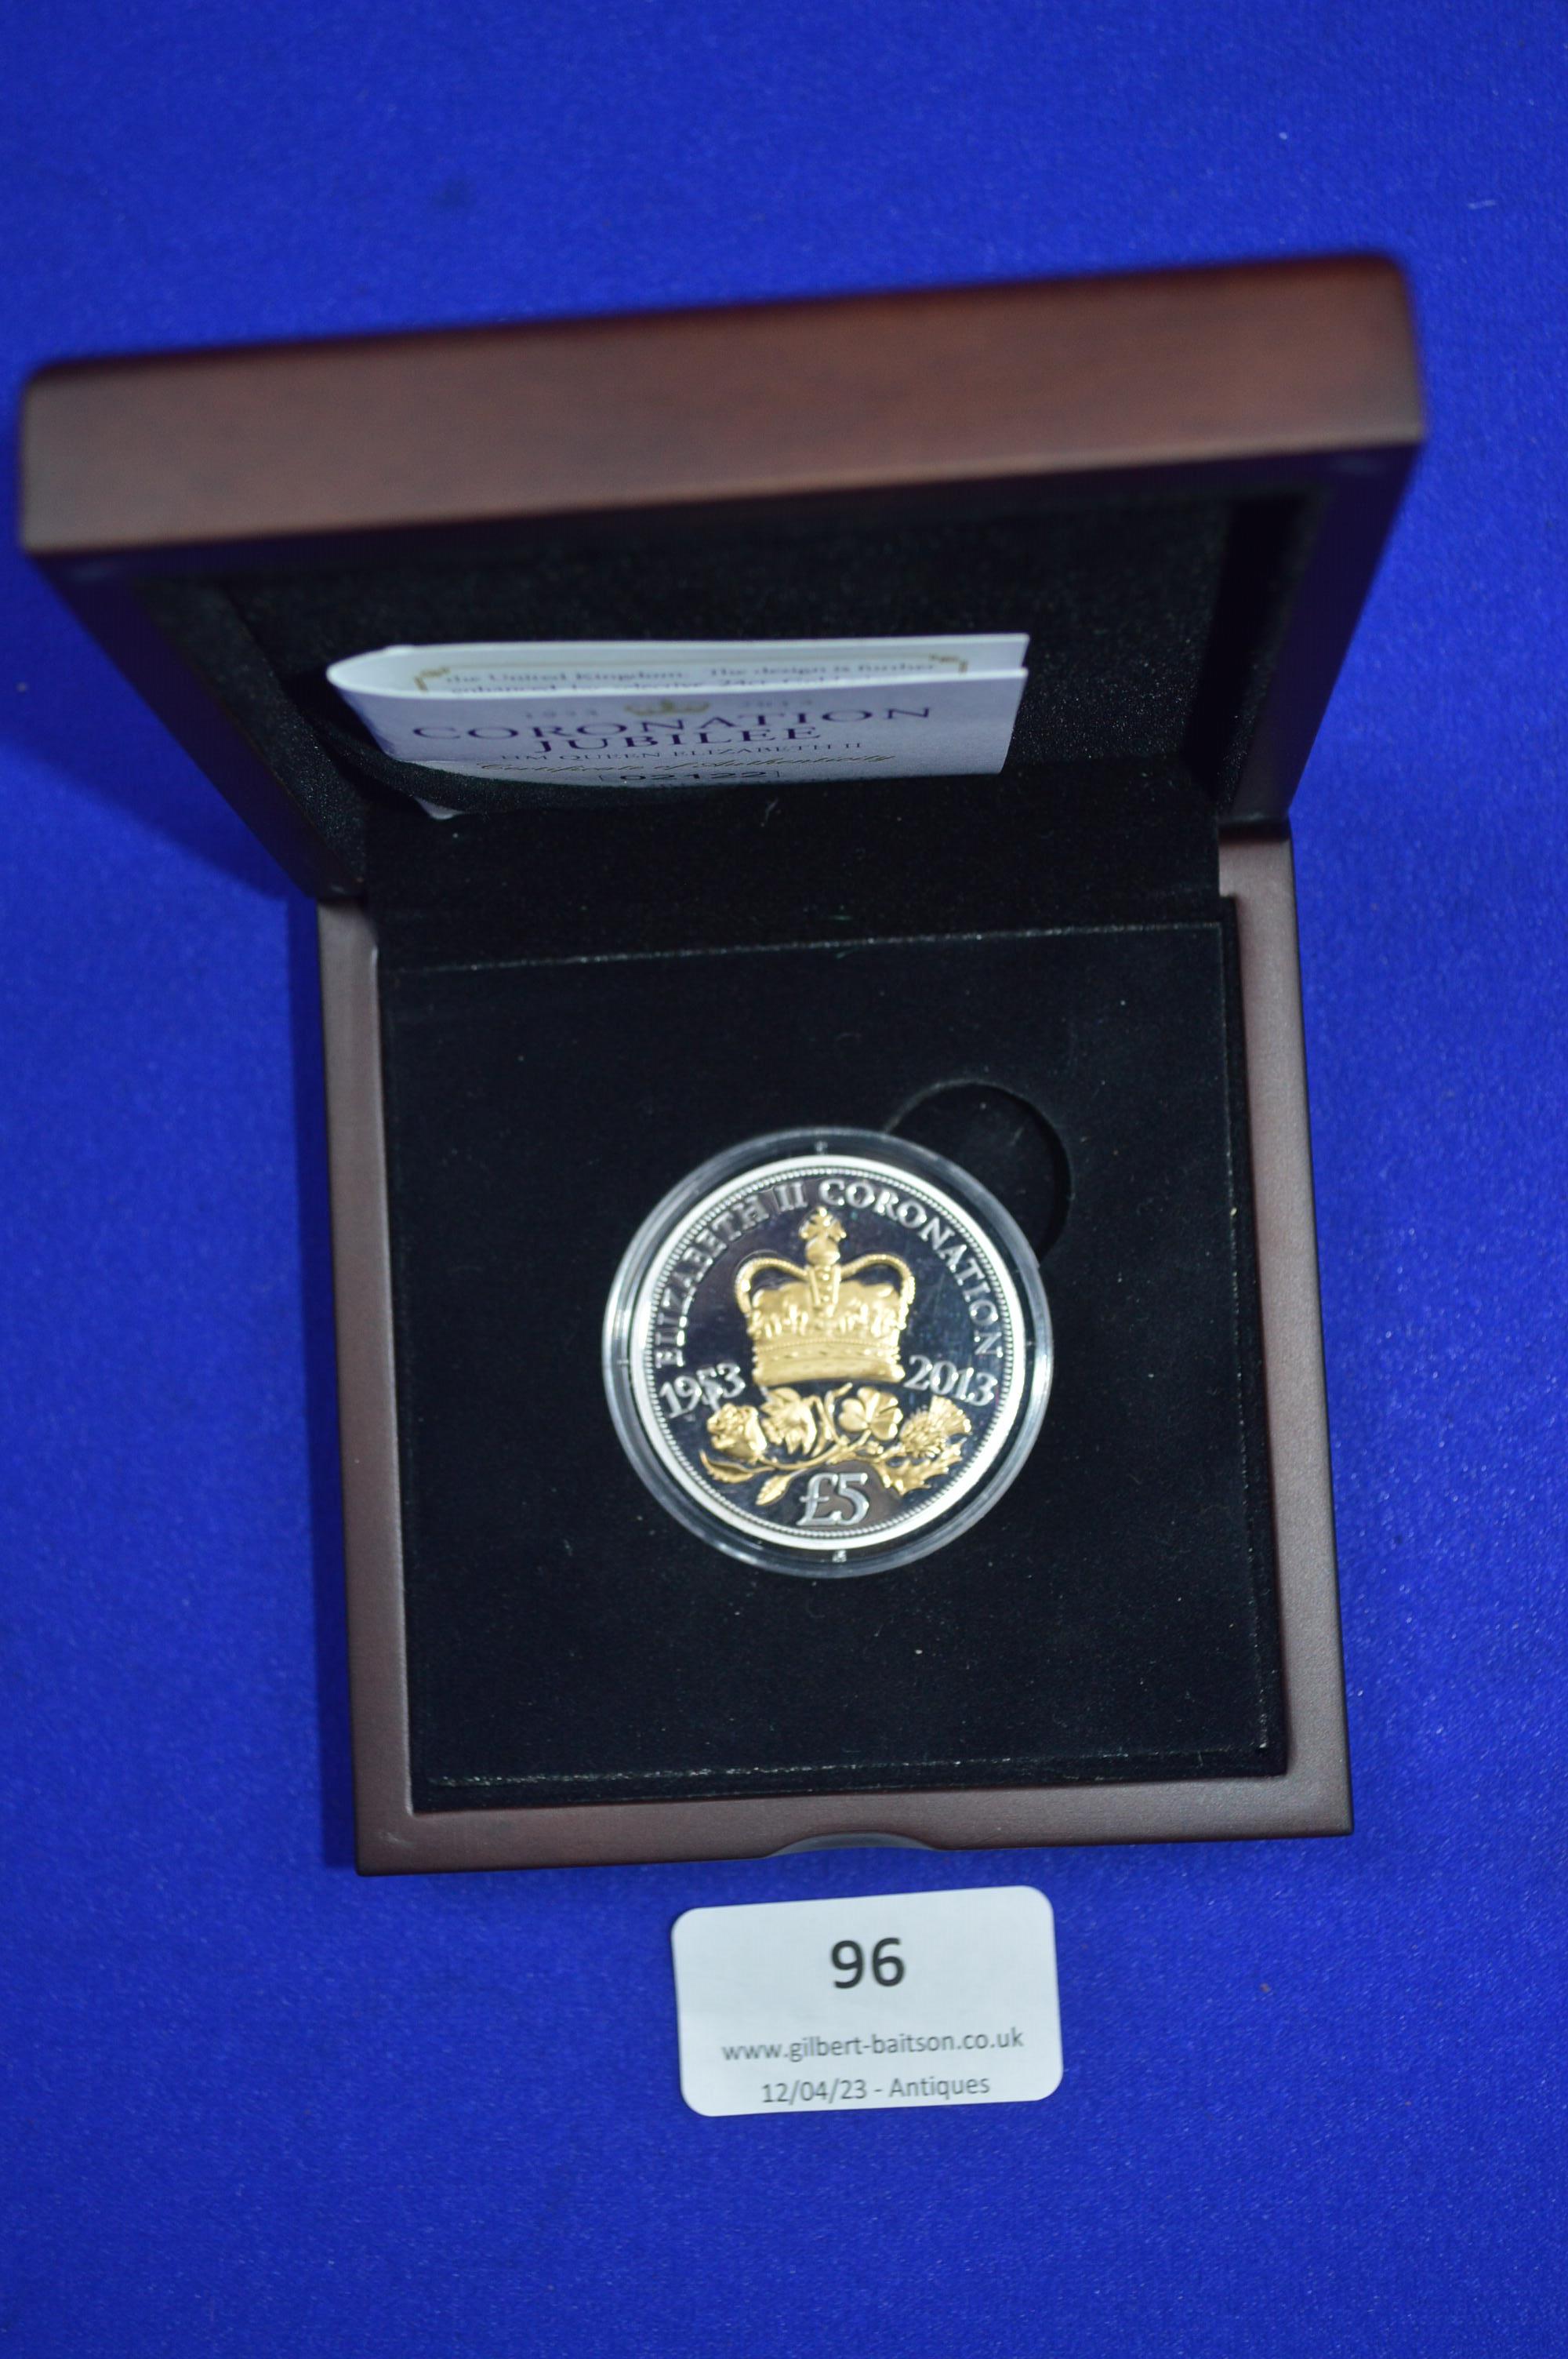 2013 Coronation Jubilee Silver £5 Coin with Presentation Case - Image 2 of 2